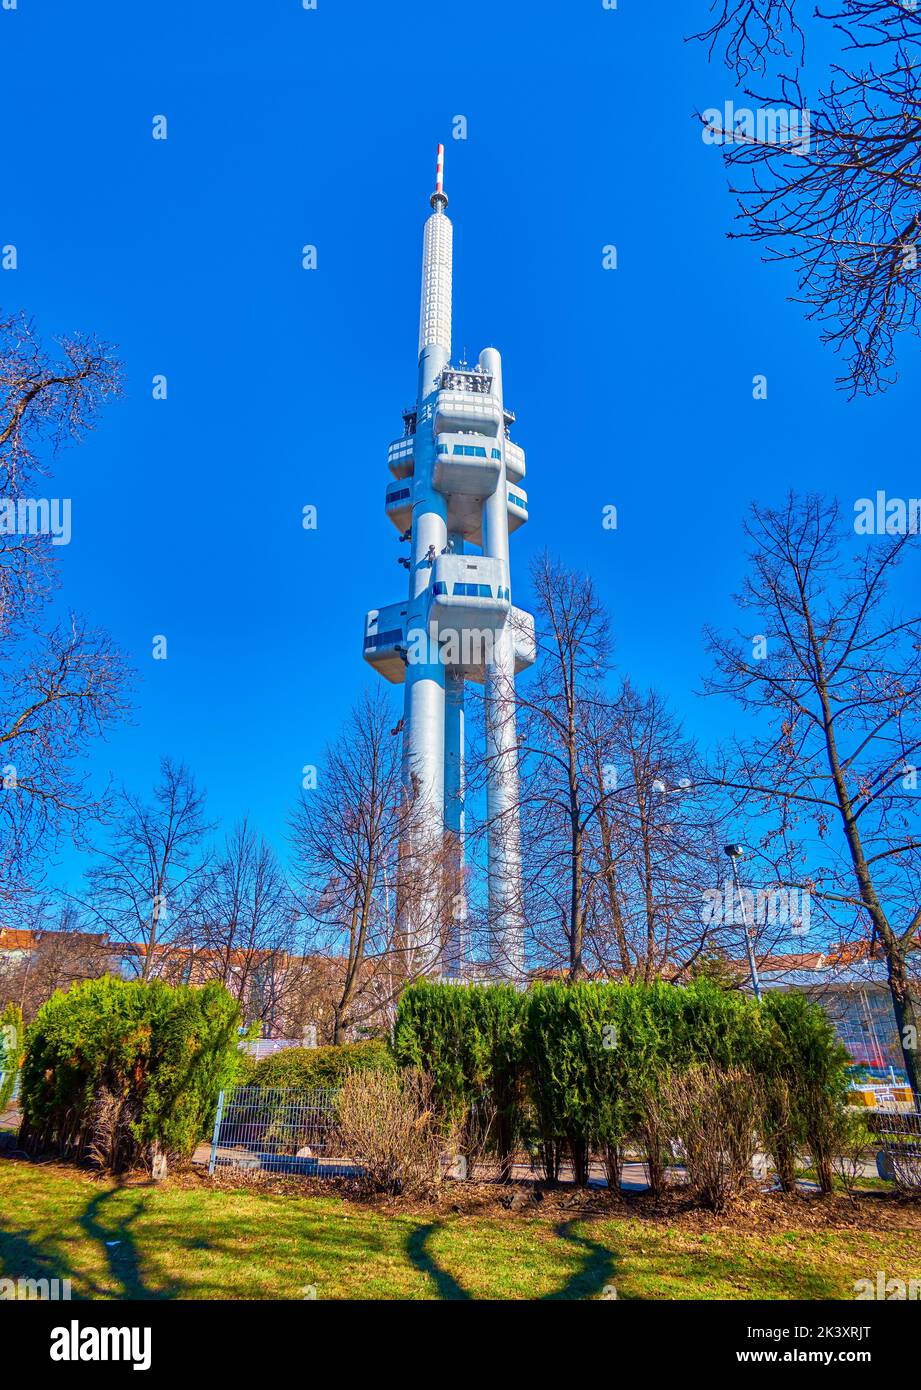 PRAGUE, CZECH REPUBLIC - MARCH 12, 2022: Prague Tower, the most unusual building in the city, located in Mahlerovy Park, on March 12 in Prague, Czech Stock Photo